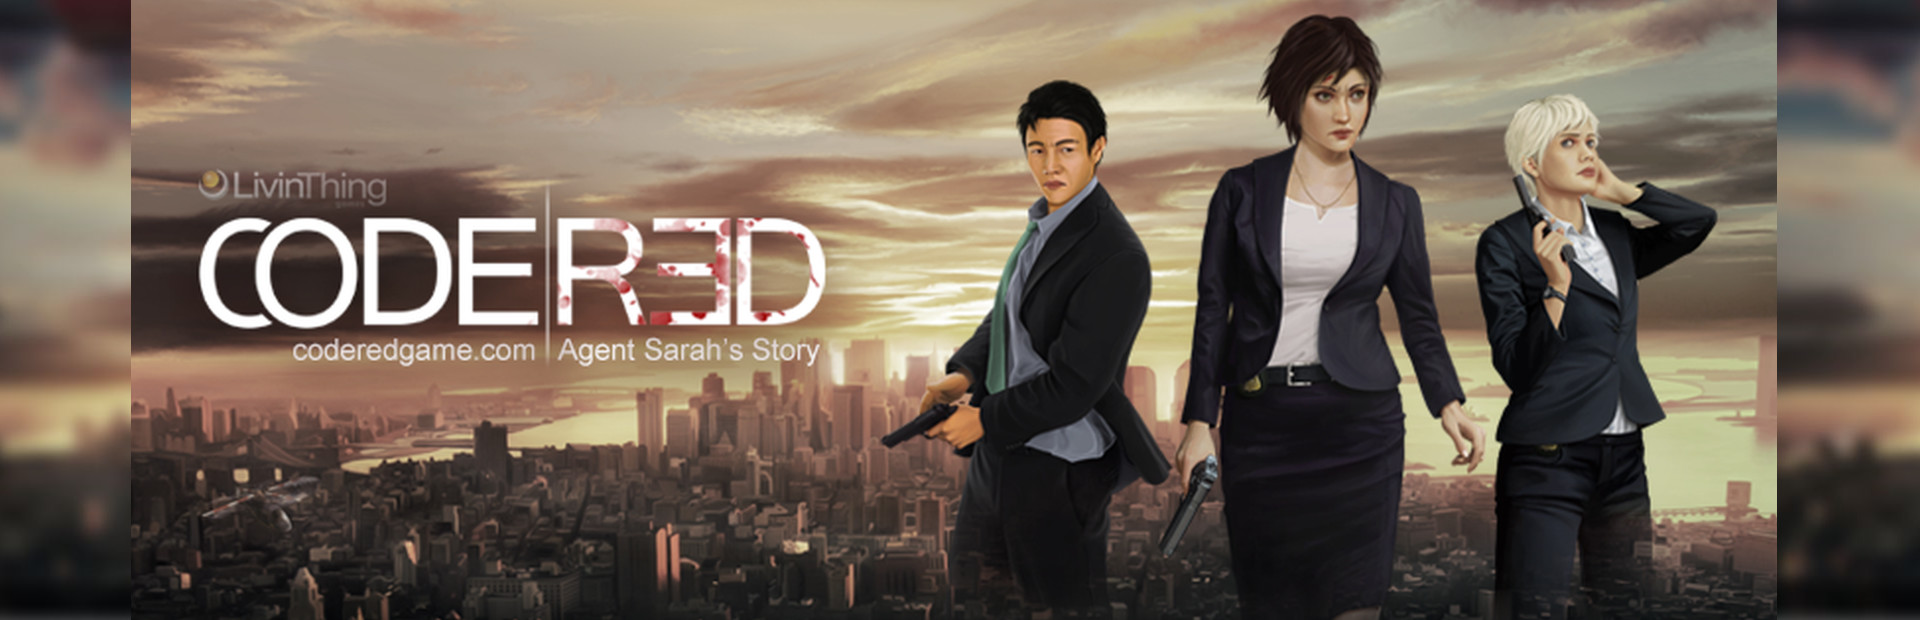 CodeRed: Agent Sarah's Story - Day one cover image